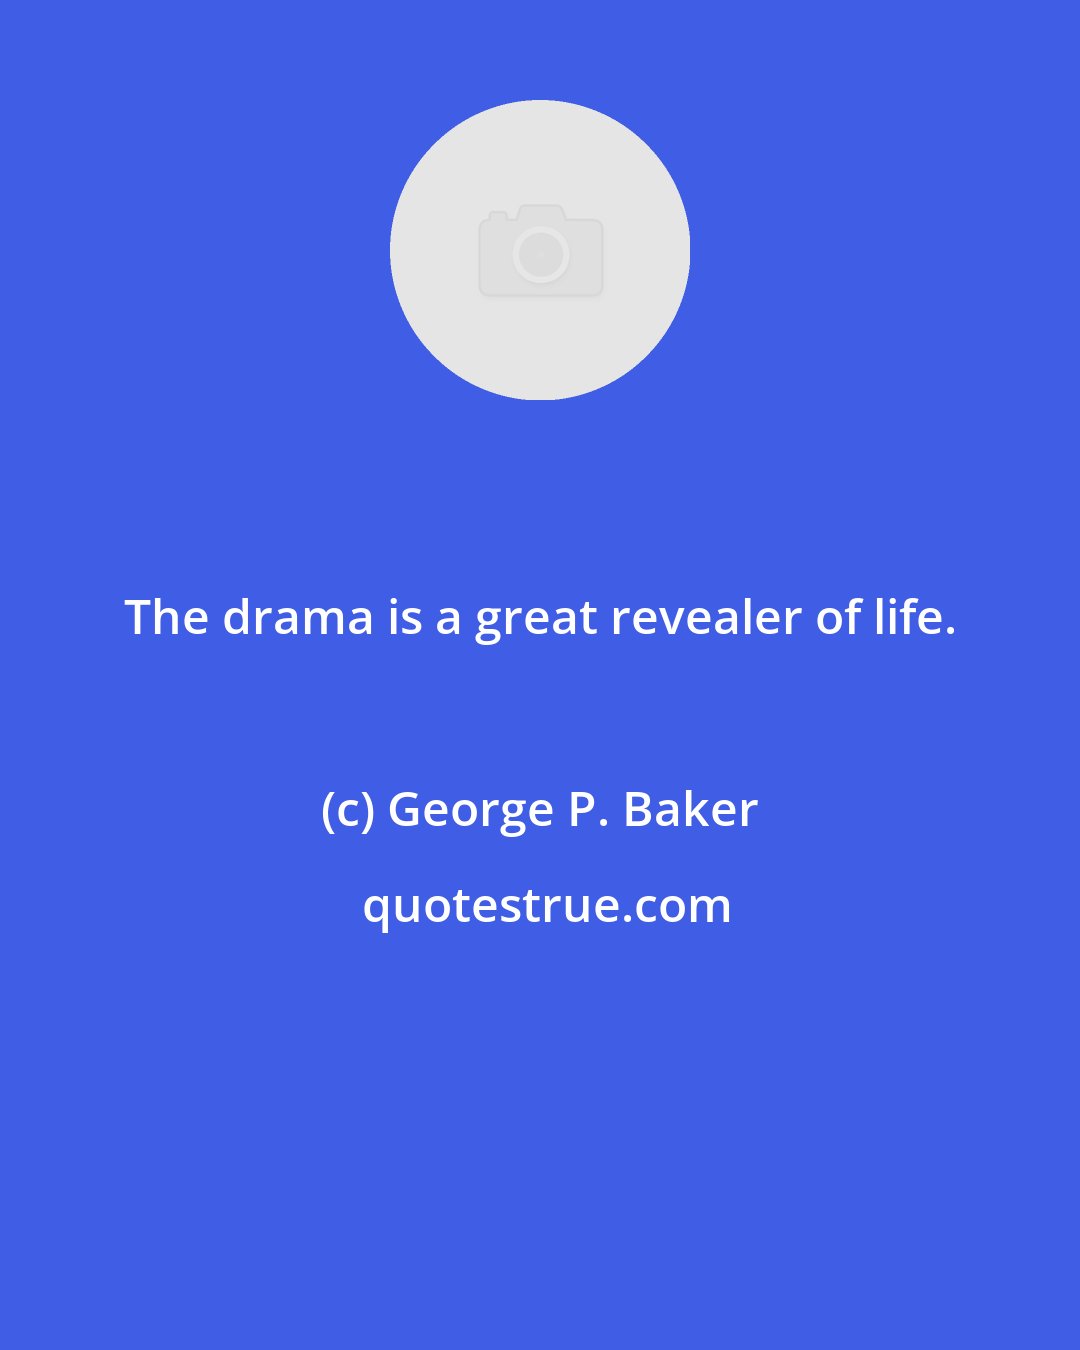 George P. Baker: The drama is a great revealer of life.